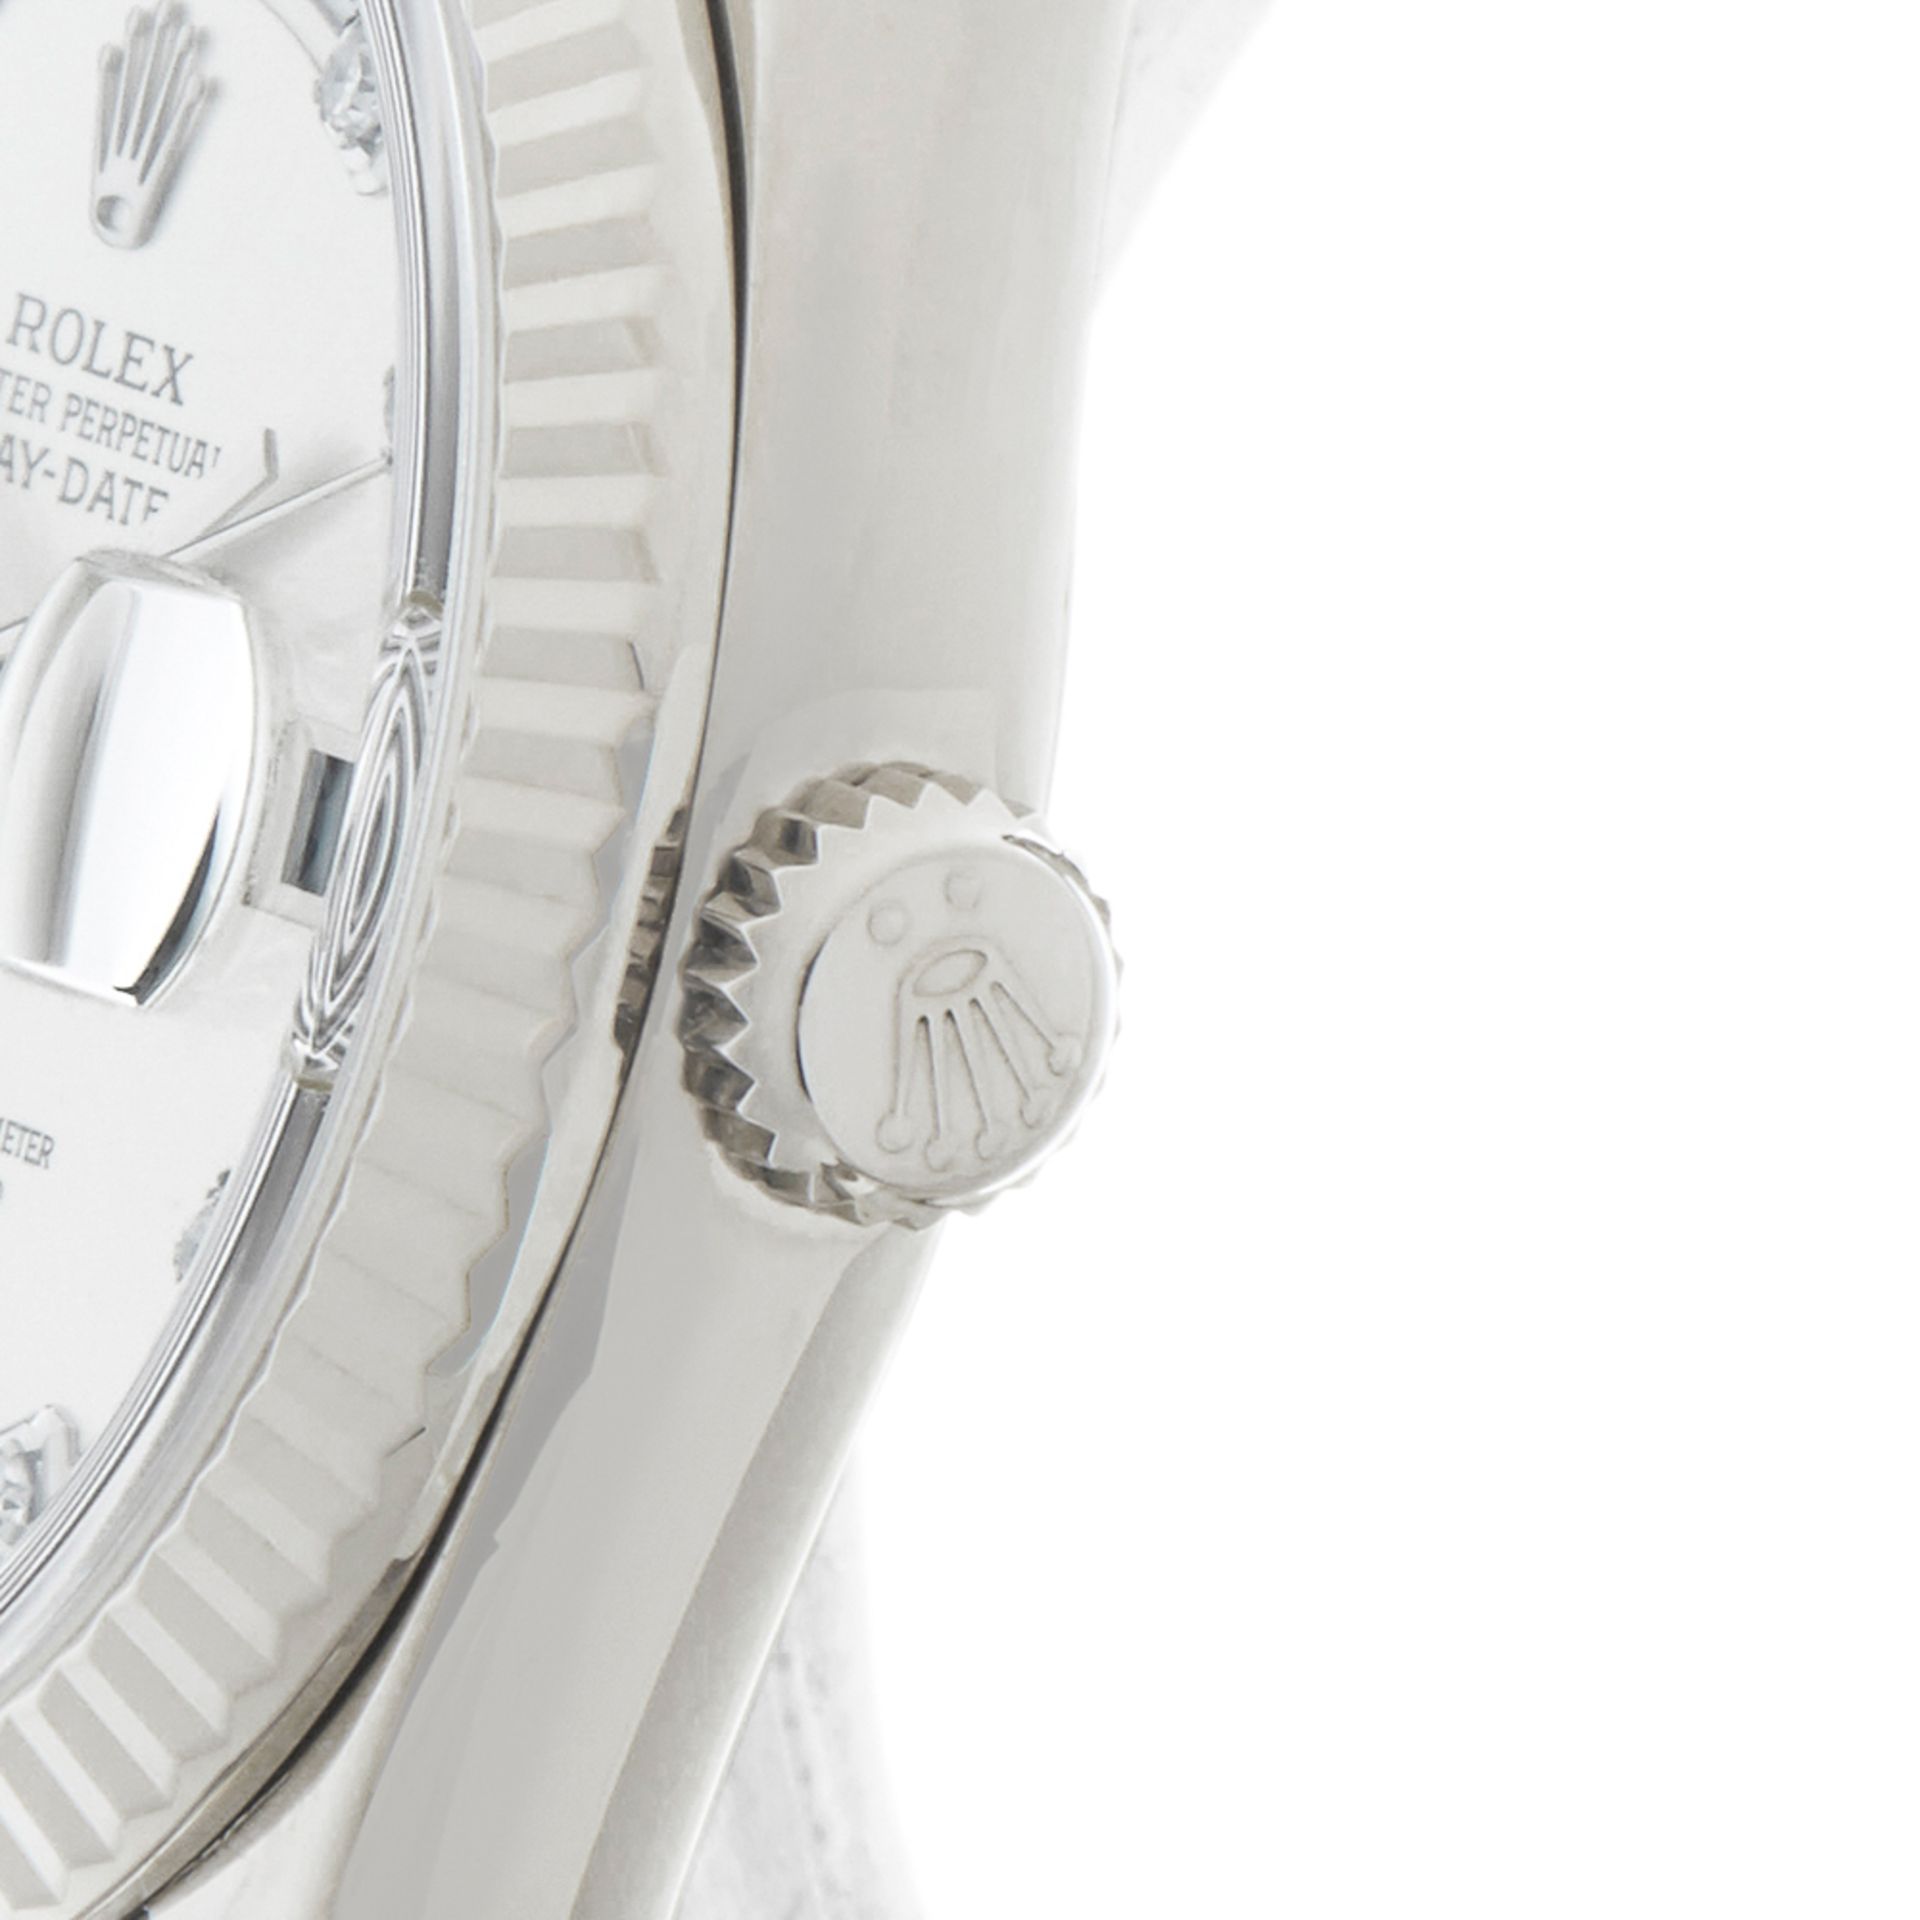 Rolex Day-Date 36mm 18k White Gold 118239 - Image 4 of 9